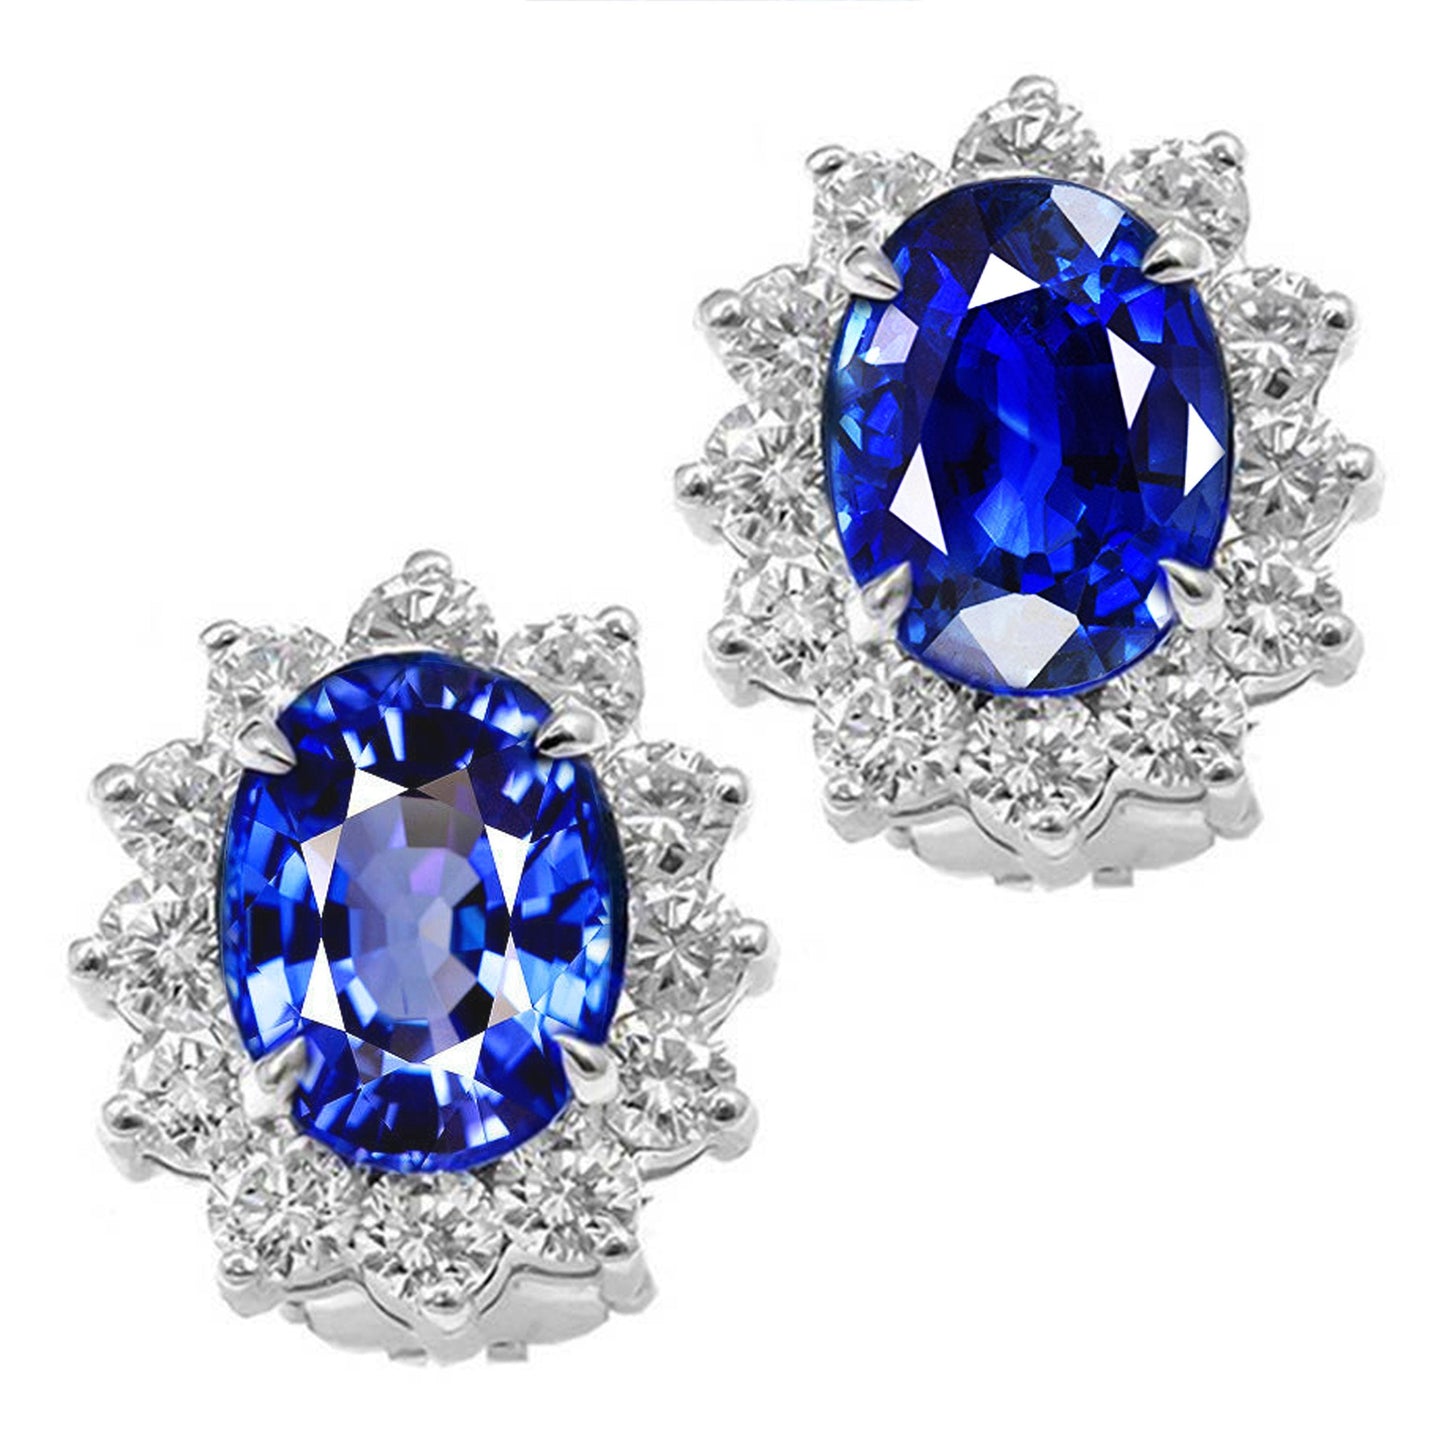 6 Ct. Blue Oval Sapphire Round Diamond Cluster Earring